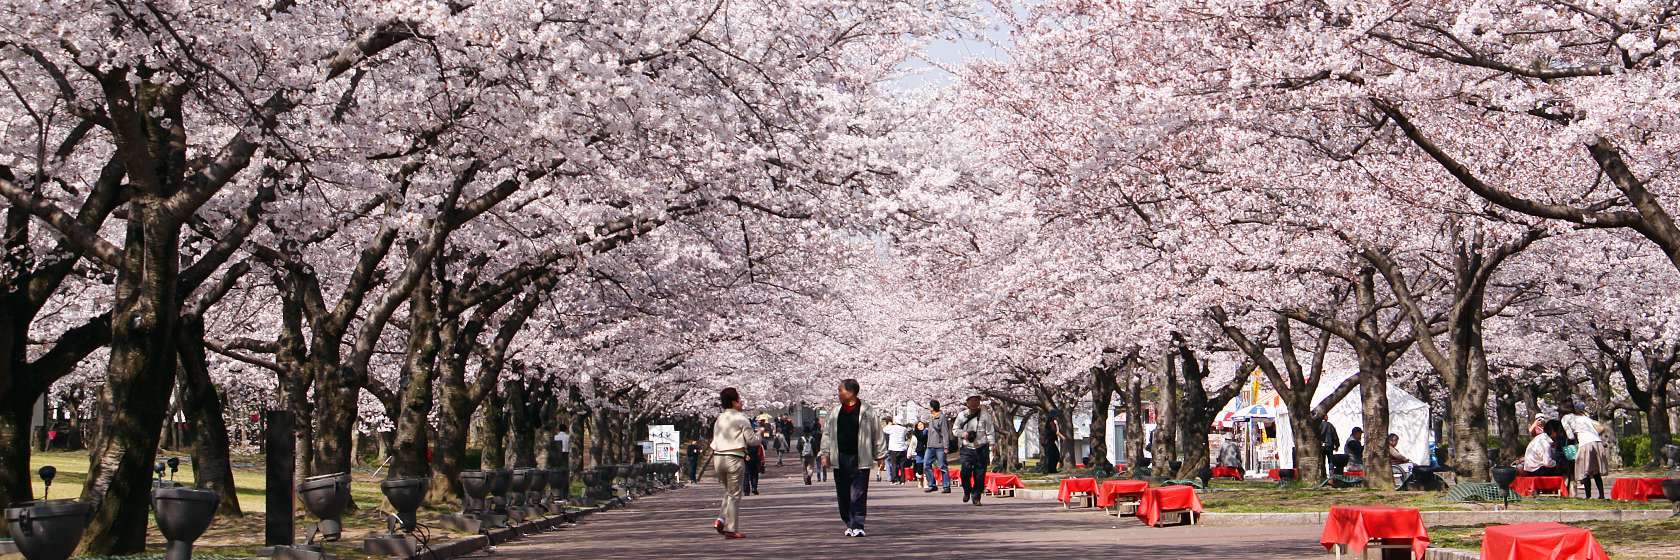 Sakura Cherry Blossom: What Spring Means to Japan